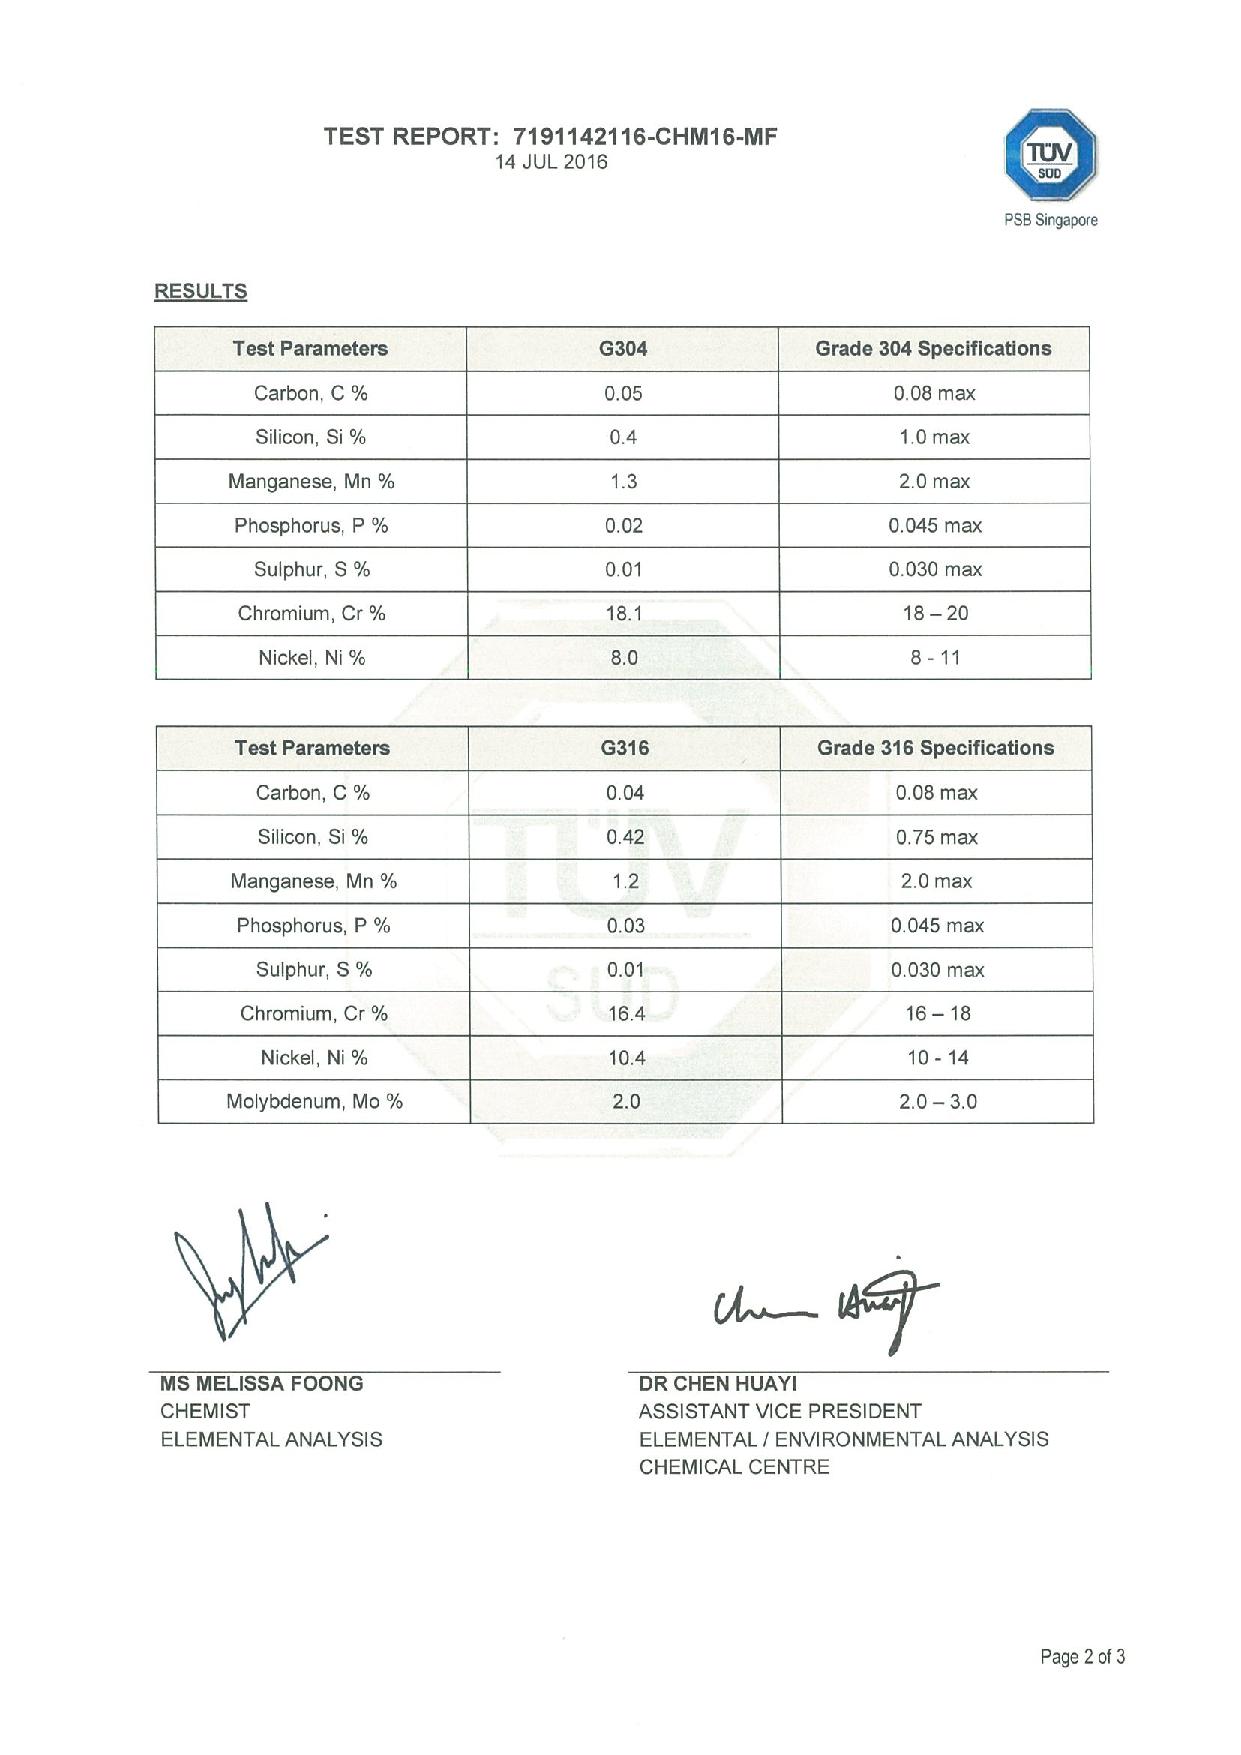 Stainless Steel Test Report